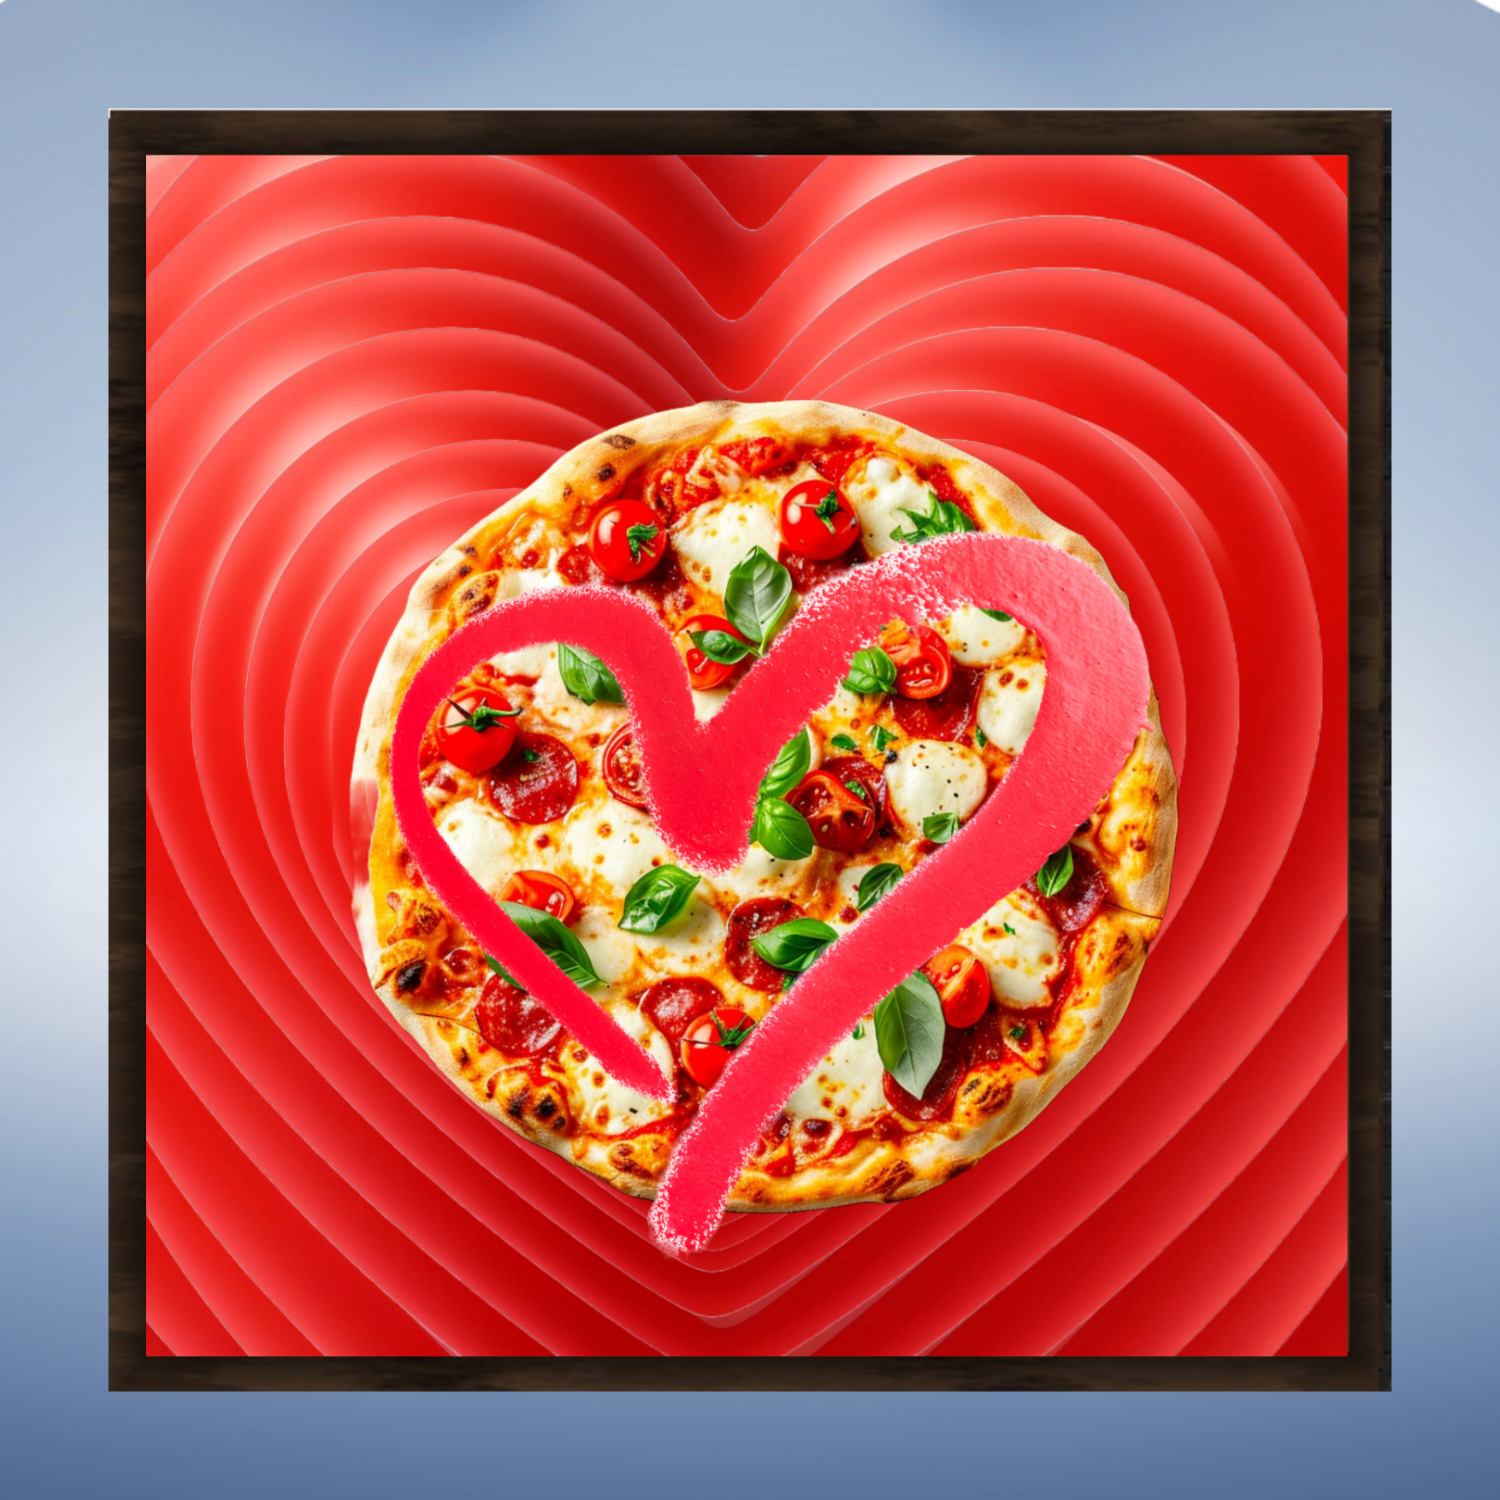 Wall Art LOVE PIZZA Canvas Print Painting Original Giclee 32X32 + Frame Love Nice Beauty Food Fun Design Fit Hot House Home Office Gift Ready Hang Living